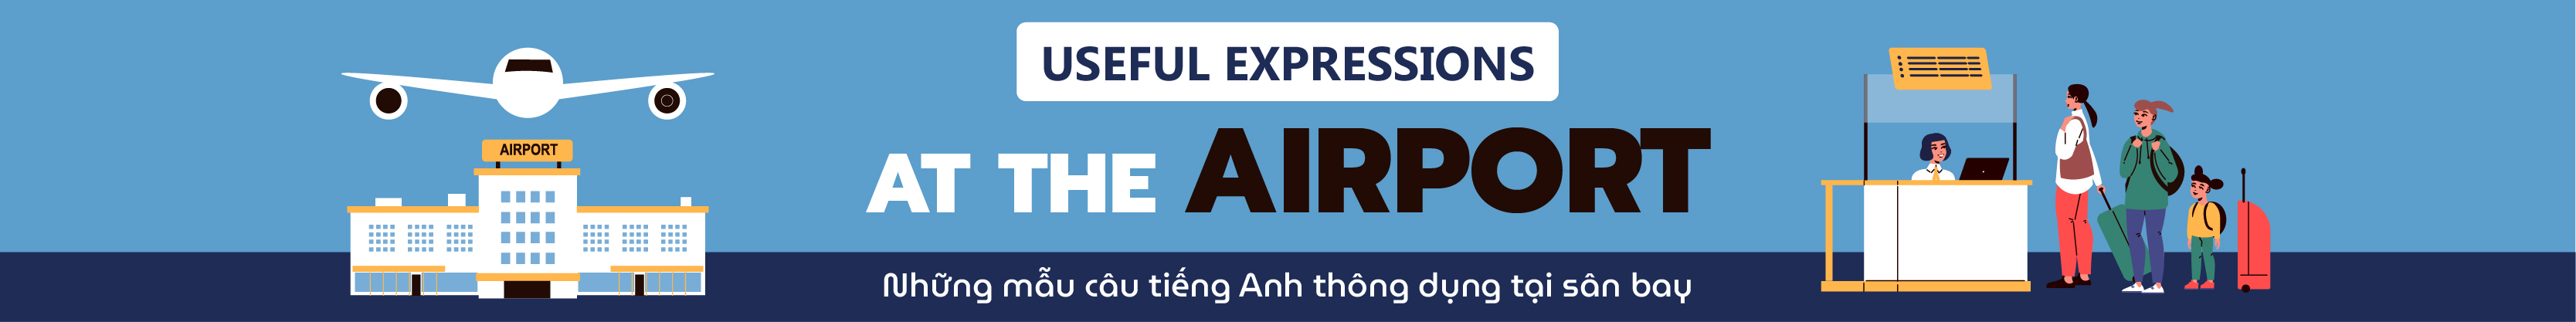 USEFUL EXPRESSIONS AT THE AIRPORT banner